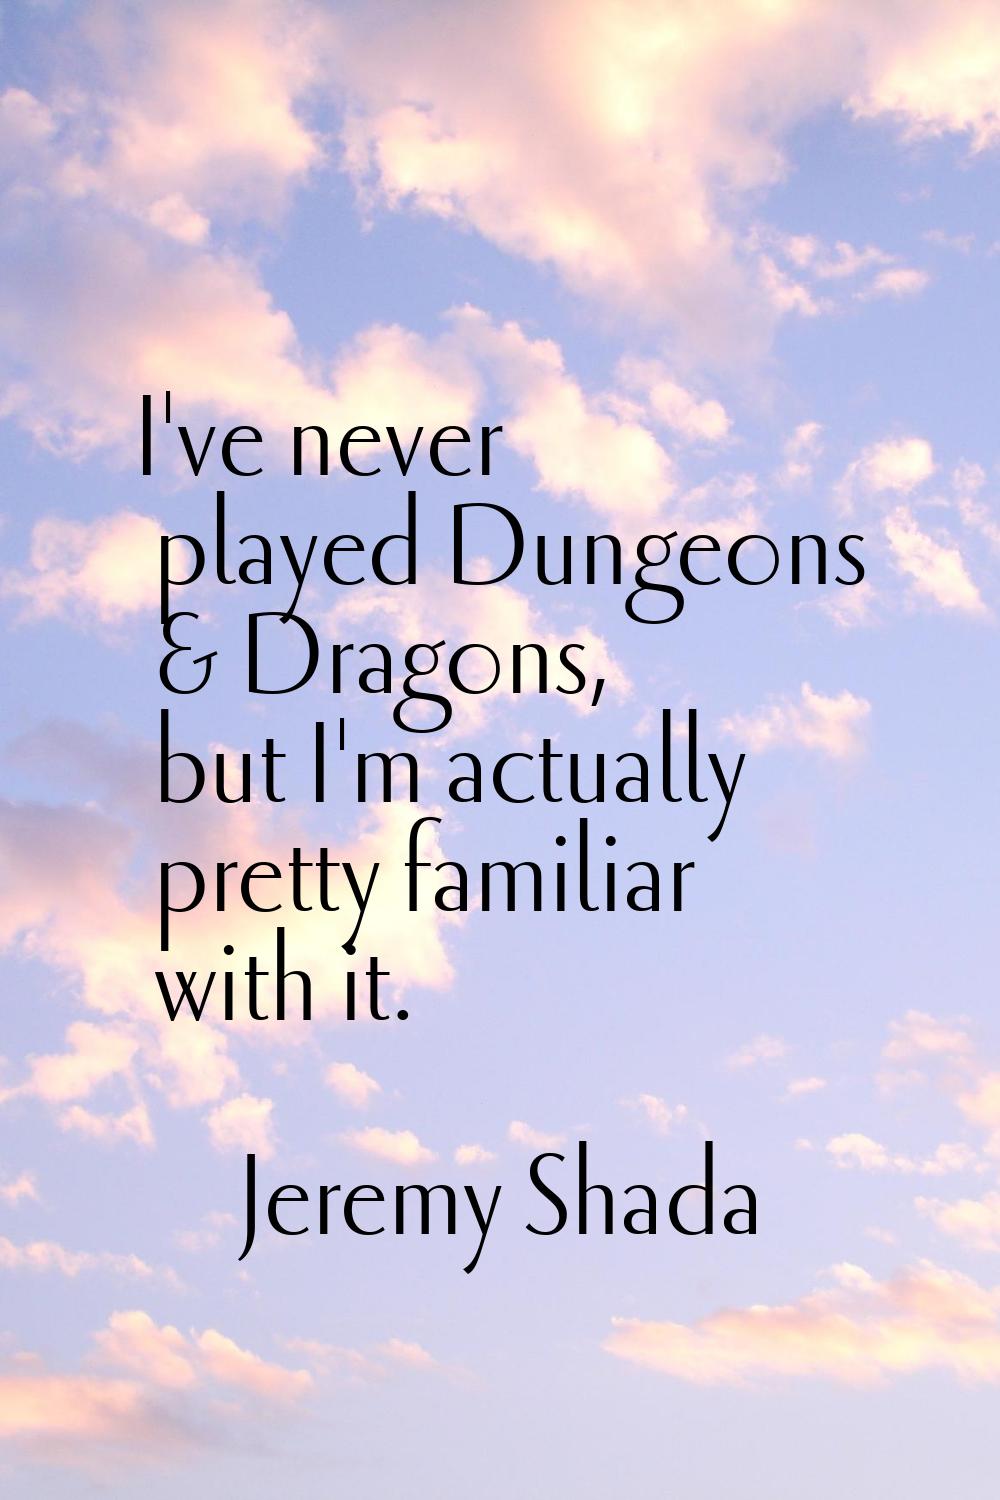 I've never played Dungeons & Dragons, but I'm actually pretty familiar with it.